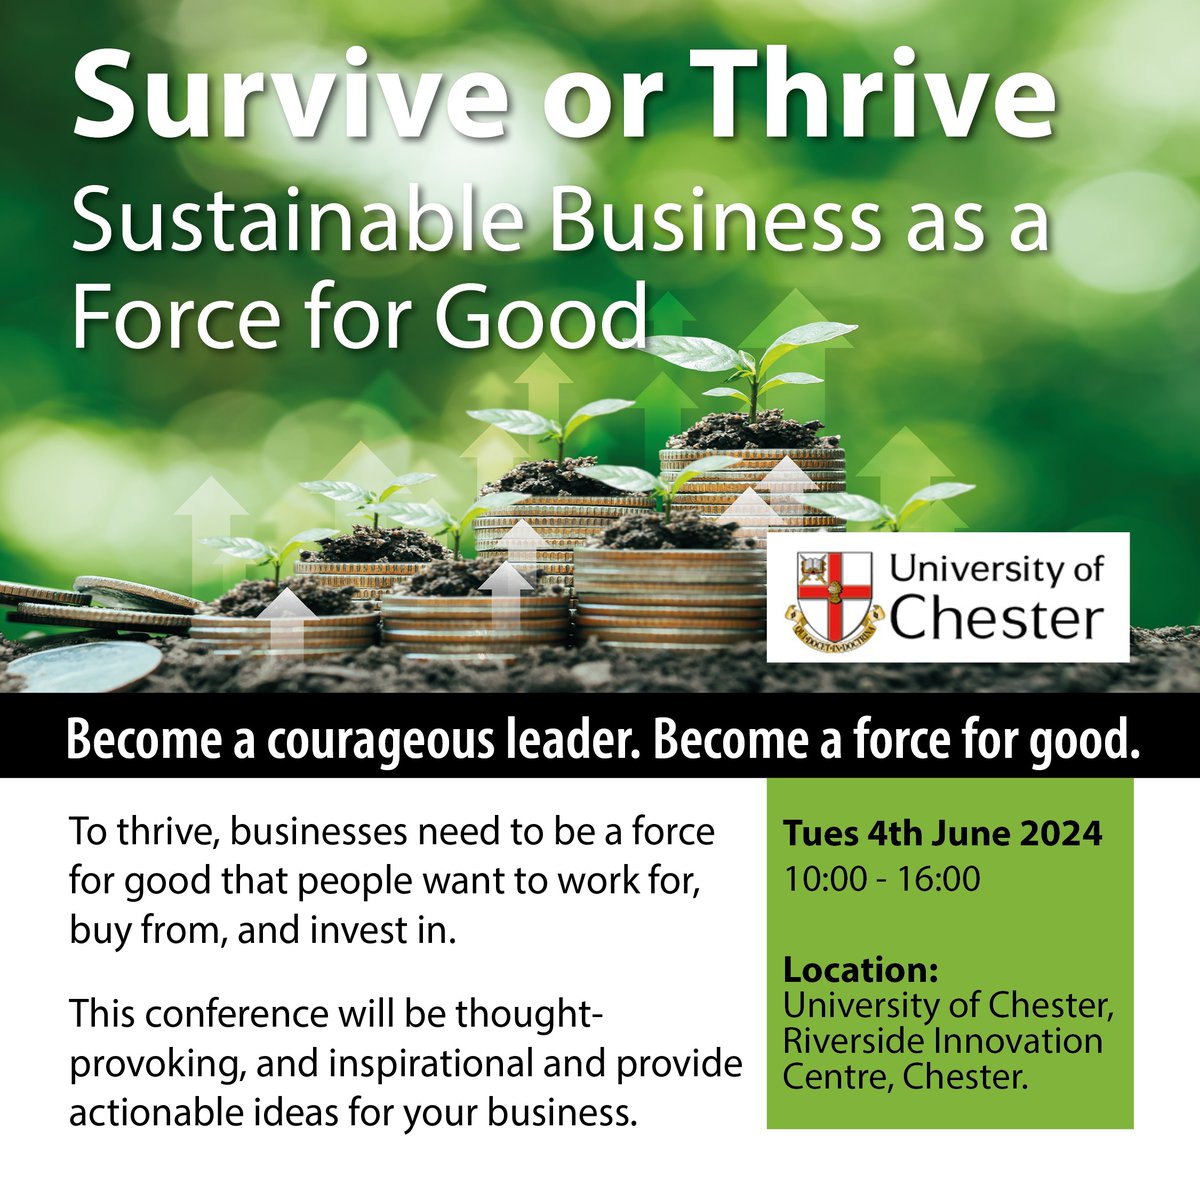 SERKEI @uochester is pleased to host this event with @uoc_business. Join a wonderful line-up of speakers, panellists and workshop hosts to explore what courageous leadership for sustainability looks like. More info here: tinyurl.com/SoT4Jn or via sustenv@chester.ac.uk